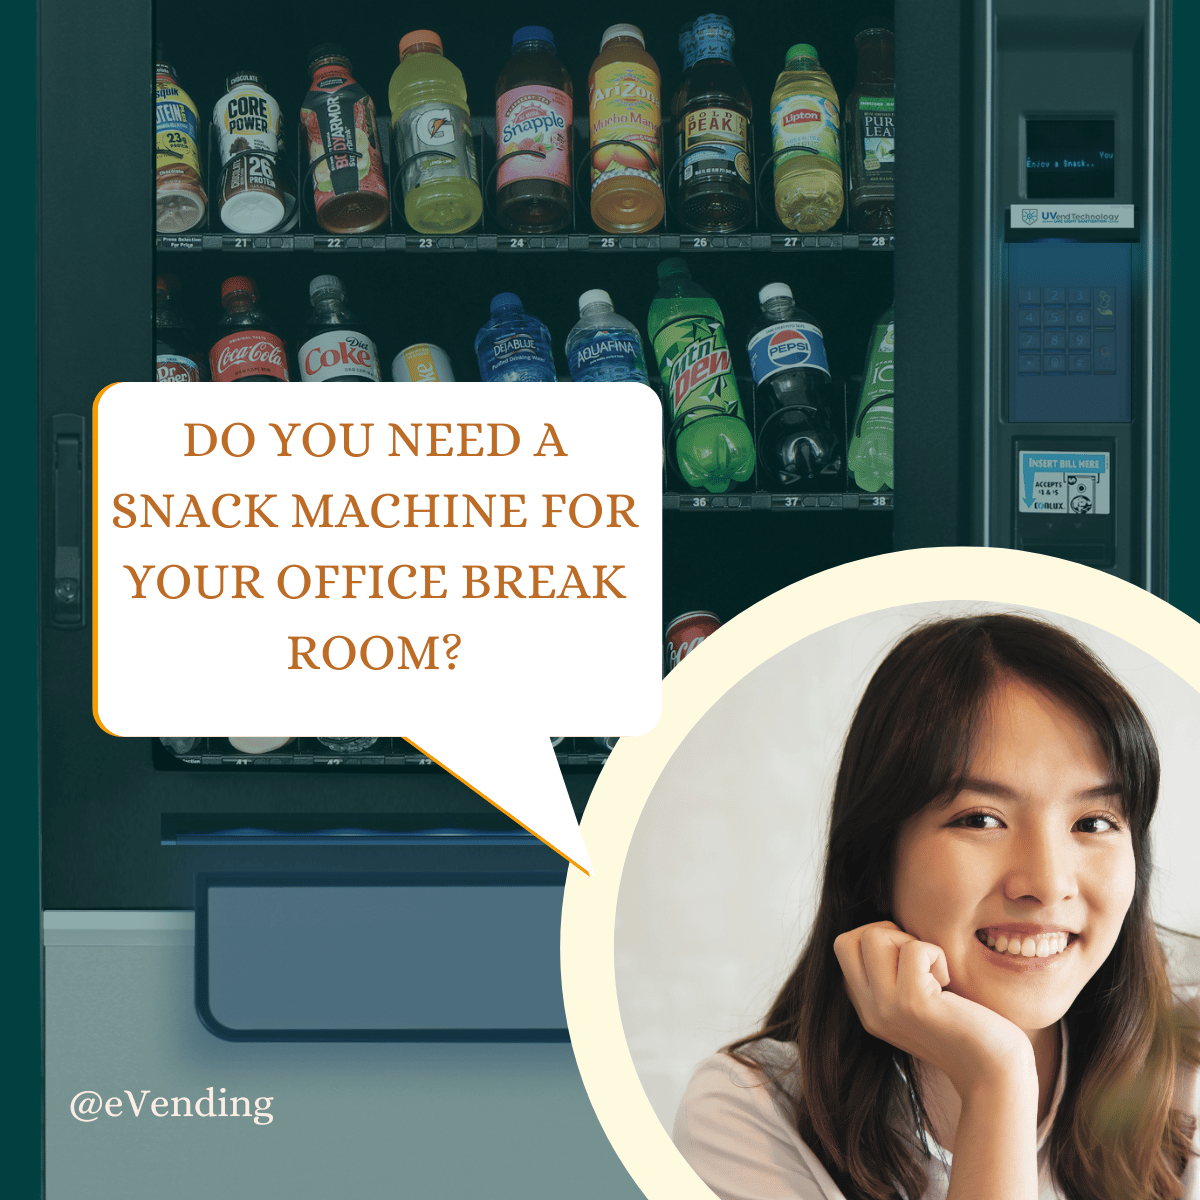 DOES YOUR OFFICE BREAK ROOM HAVE A SNACK MACHINE?